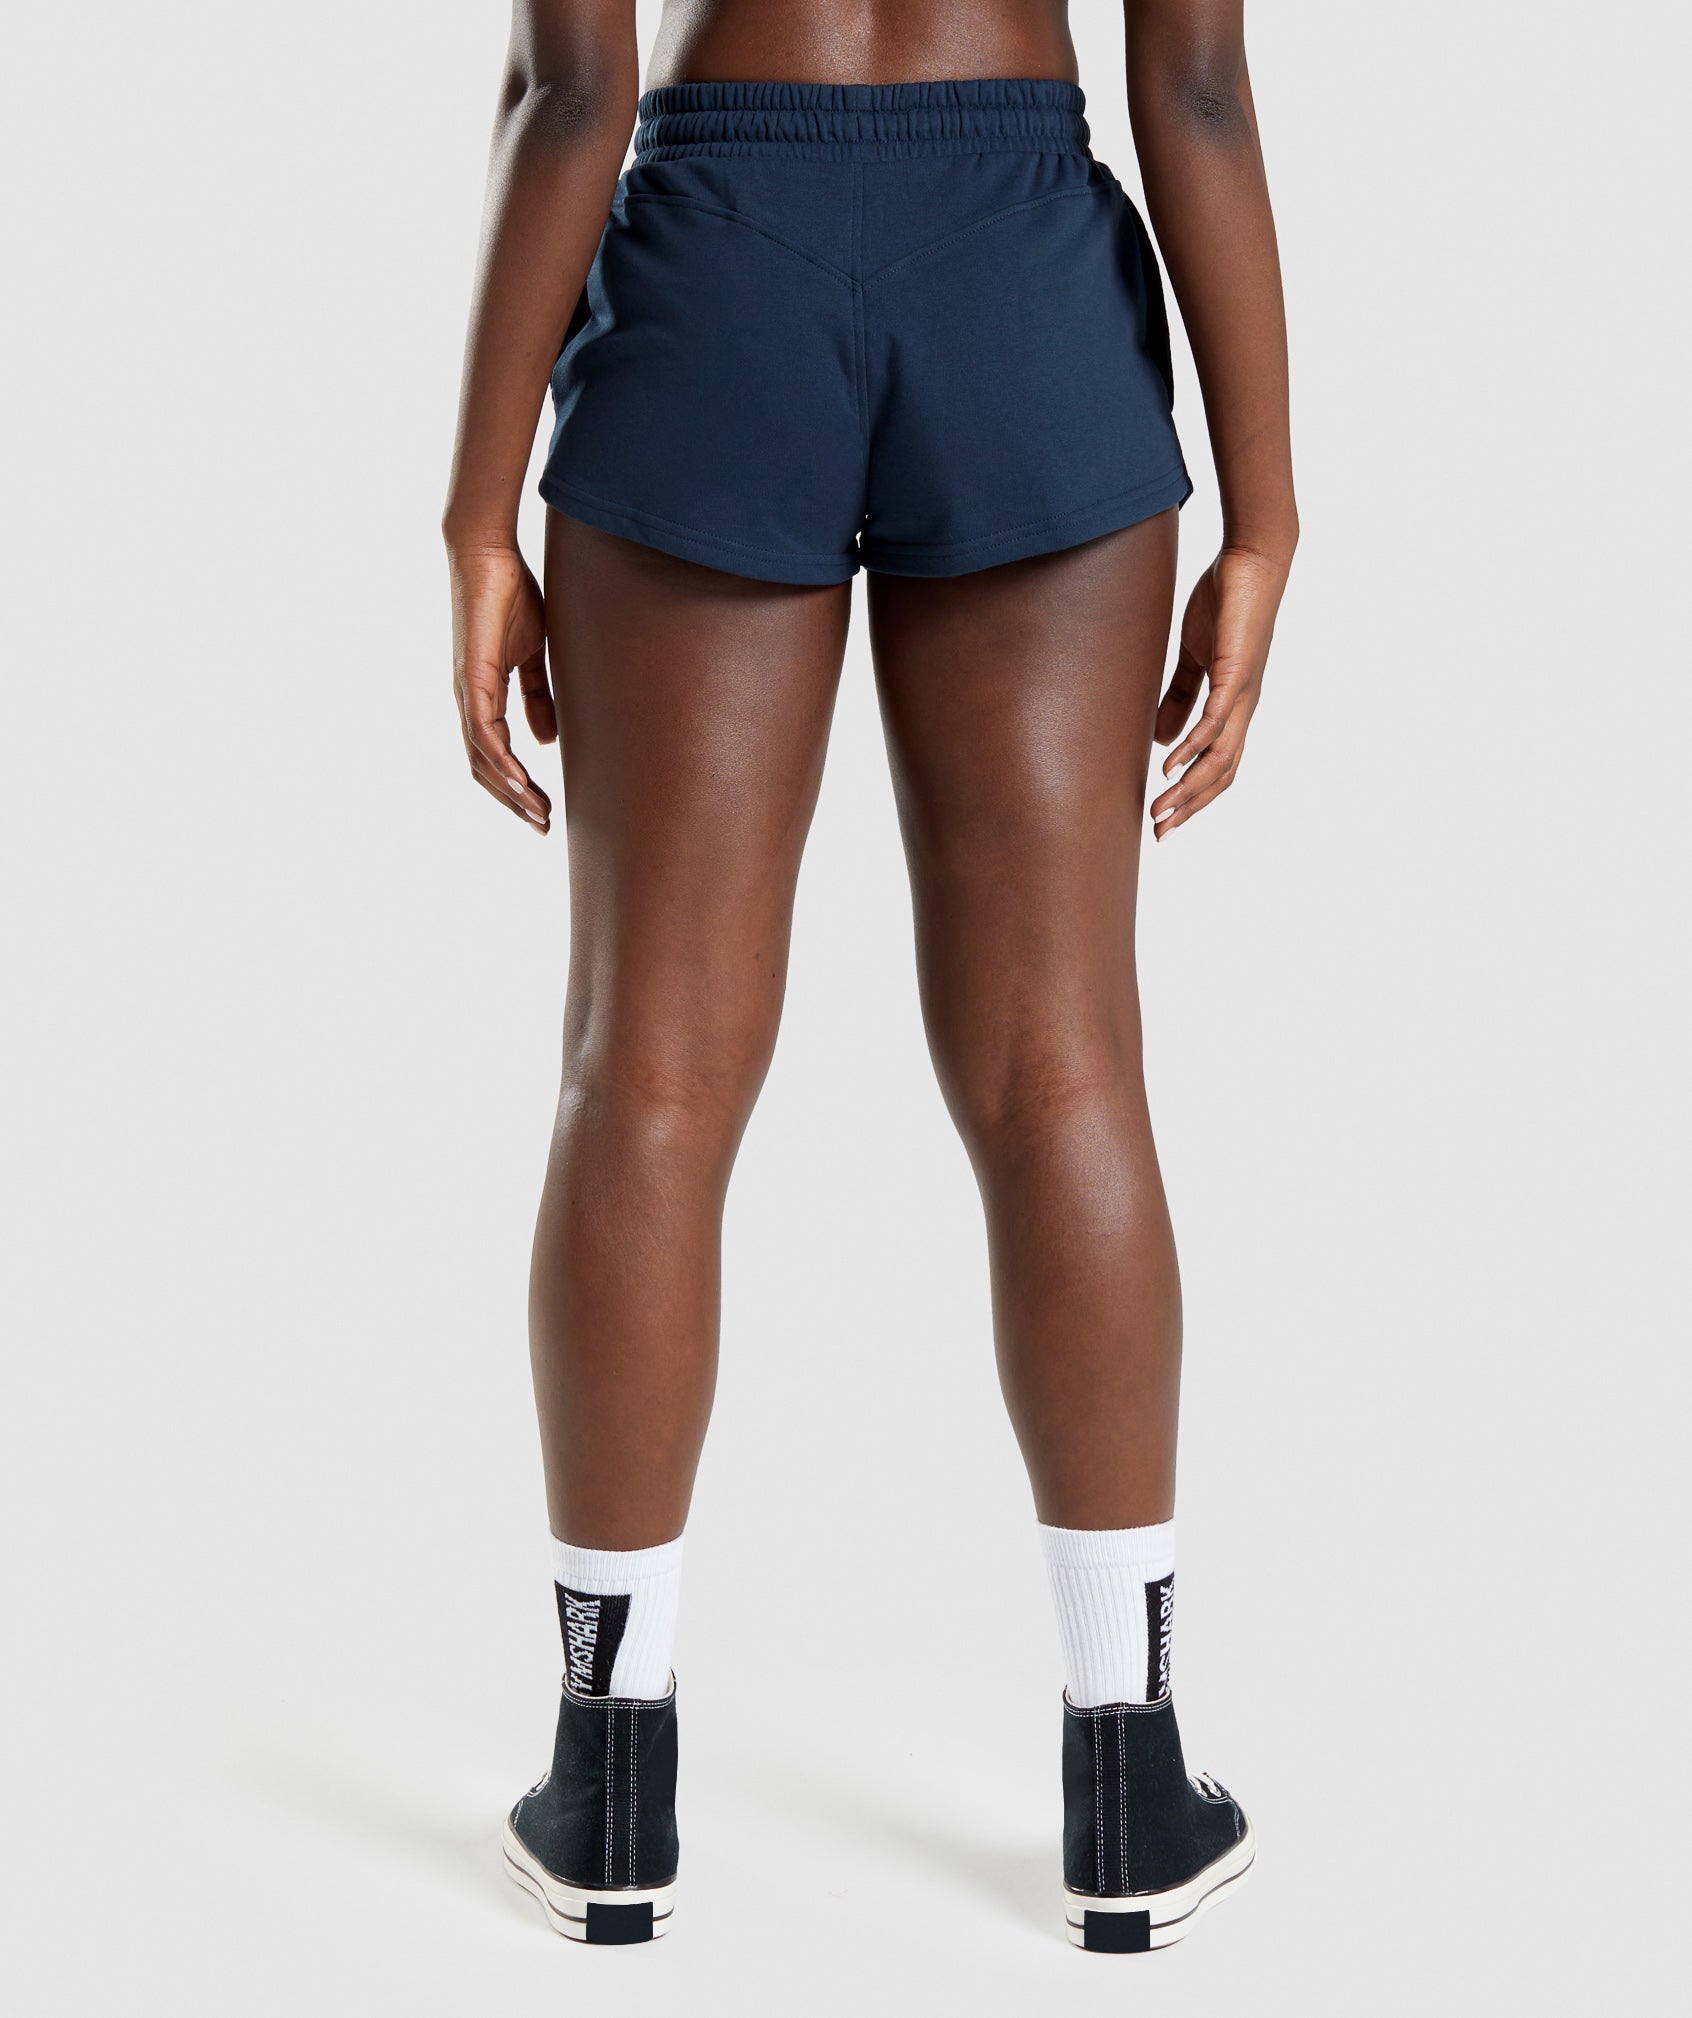 Legacy Graphic Shorts in Navy - view 2